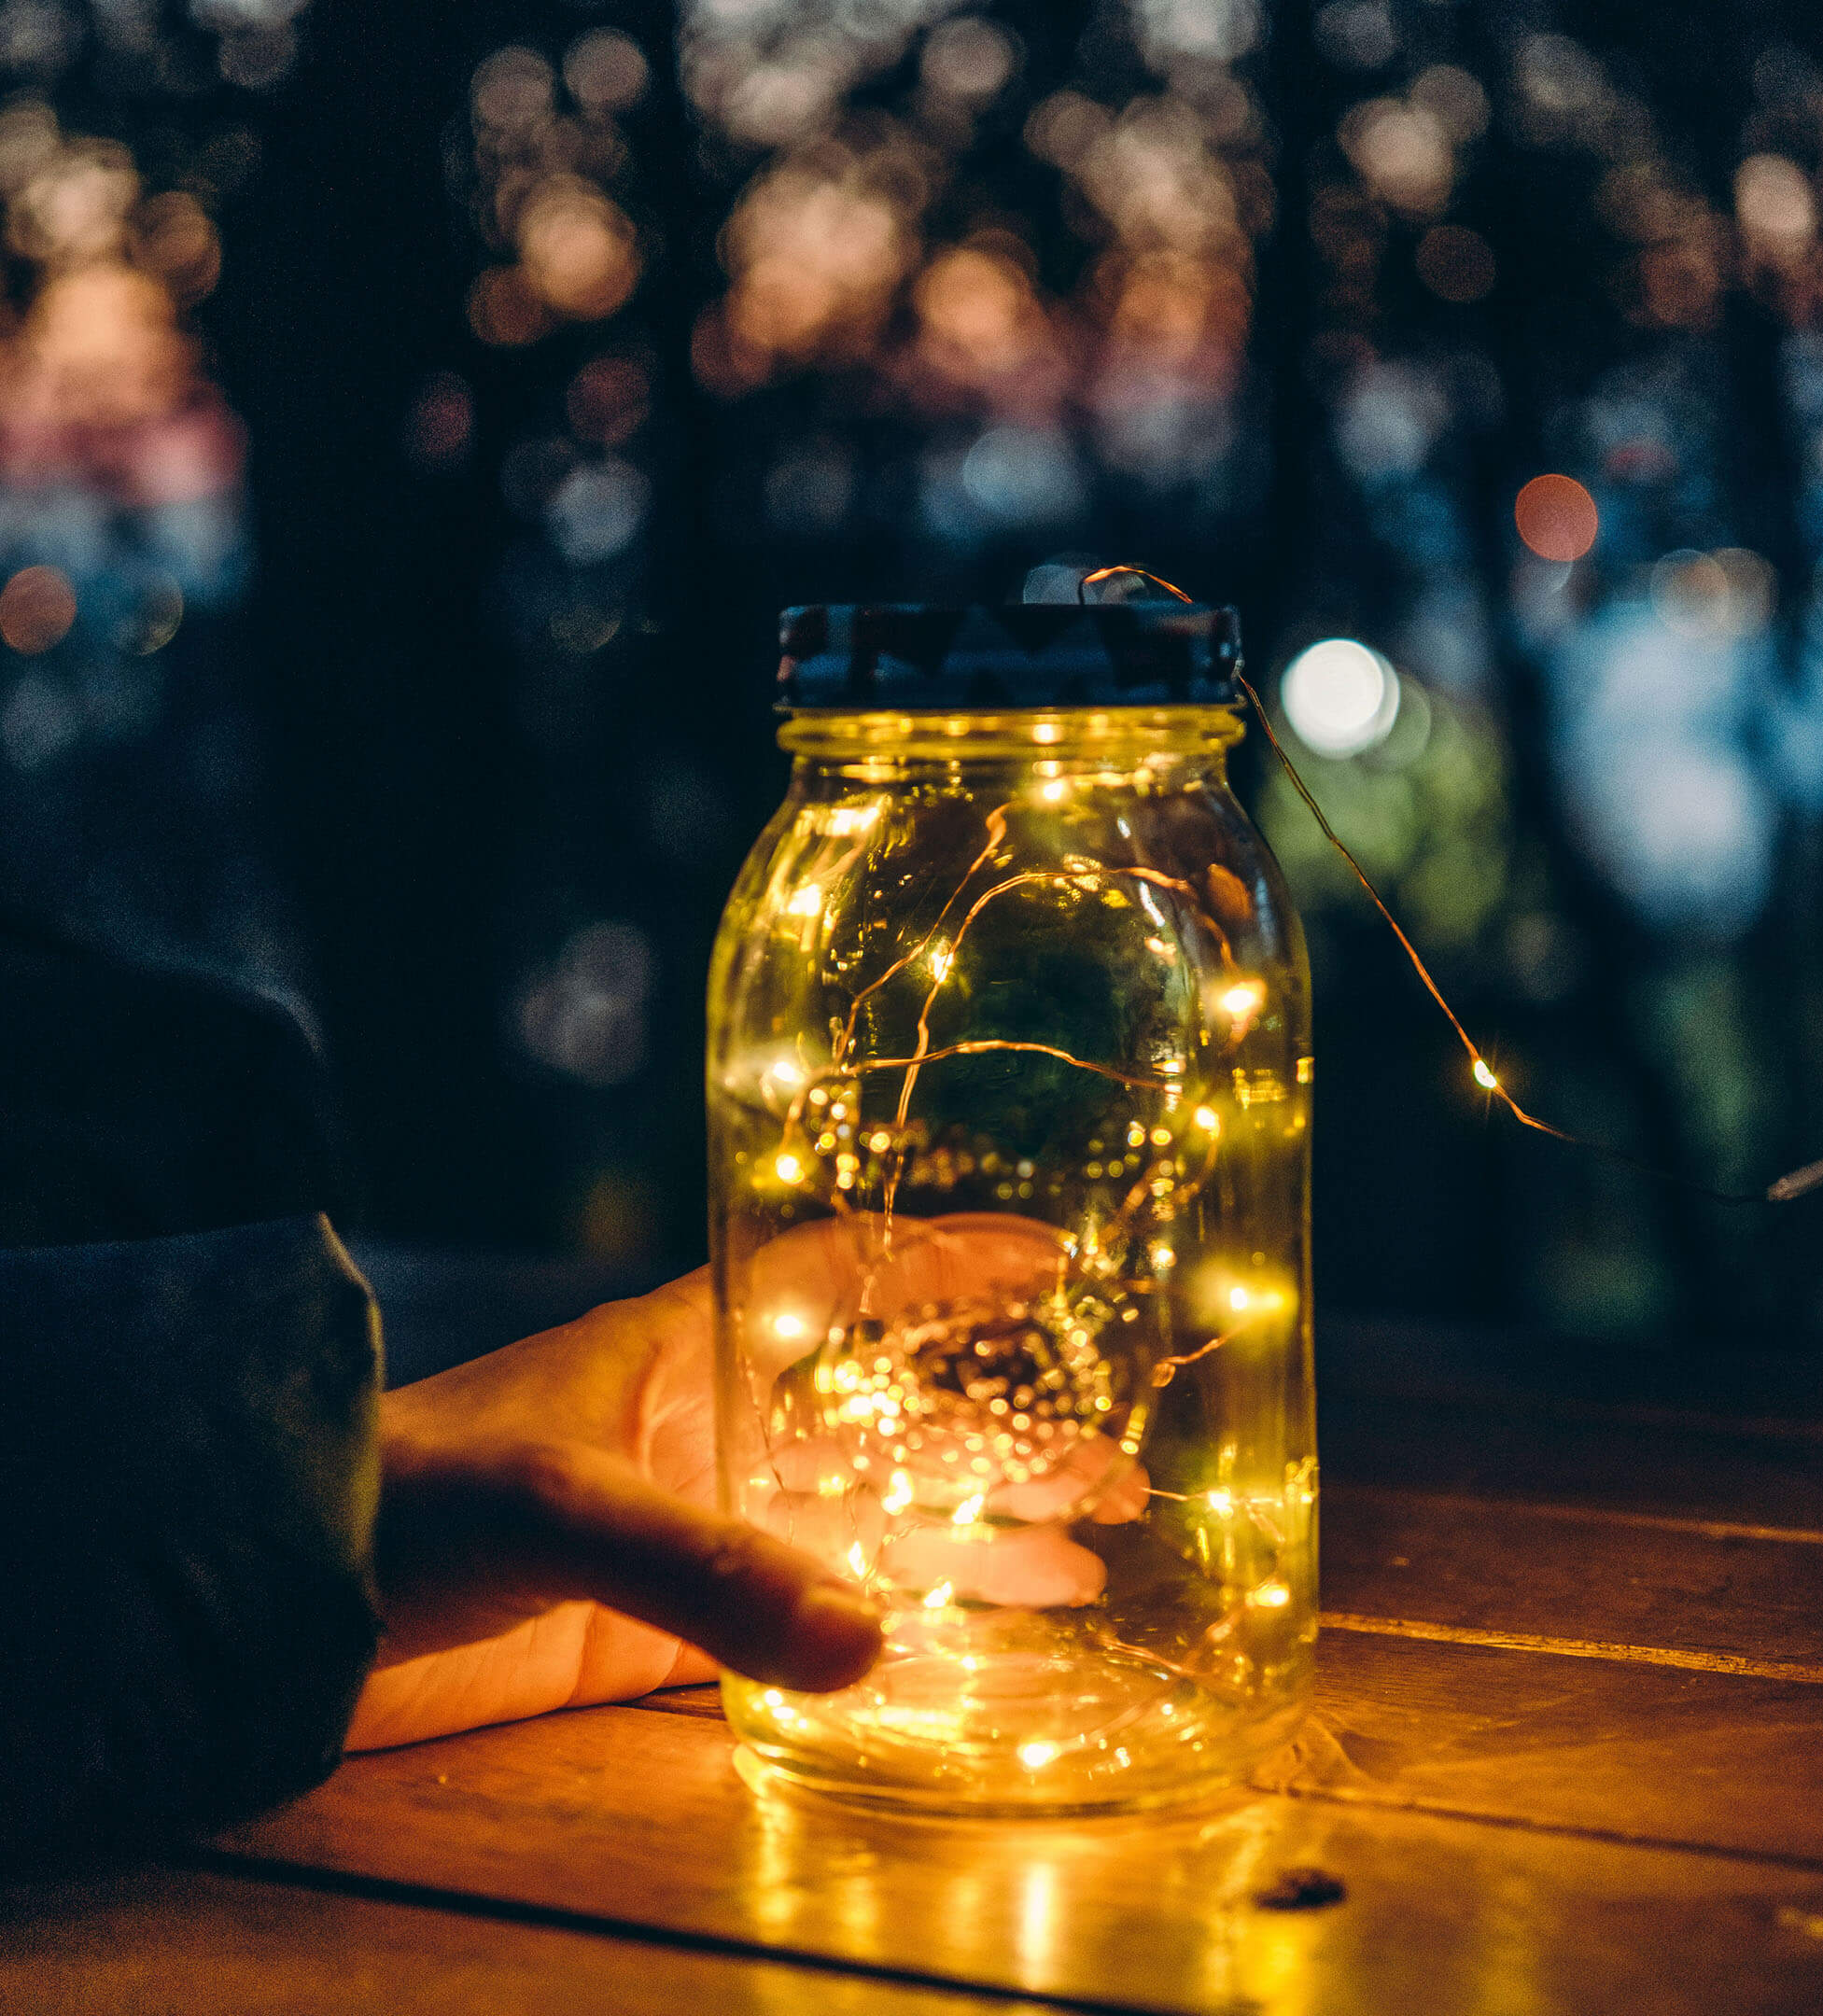 Handheld mason jar lit with led lights creates flawless & consistent social presence as our strategy essential for business